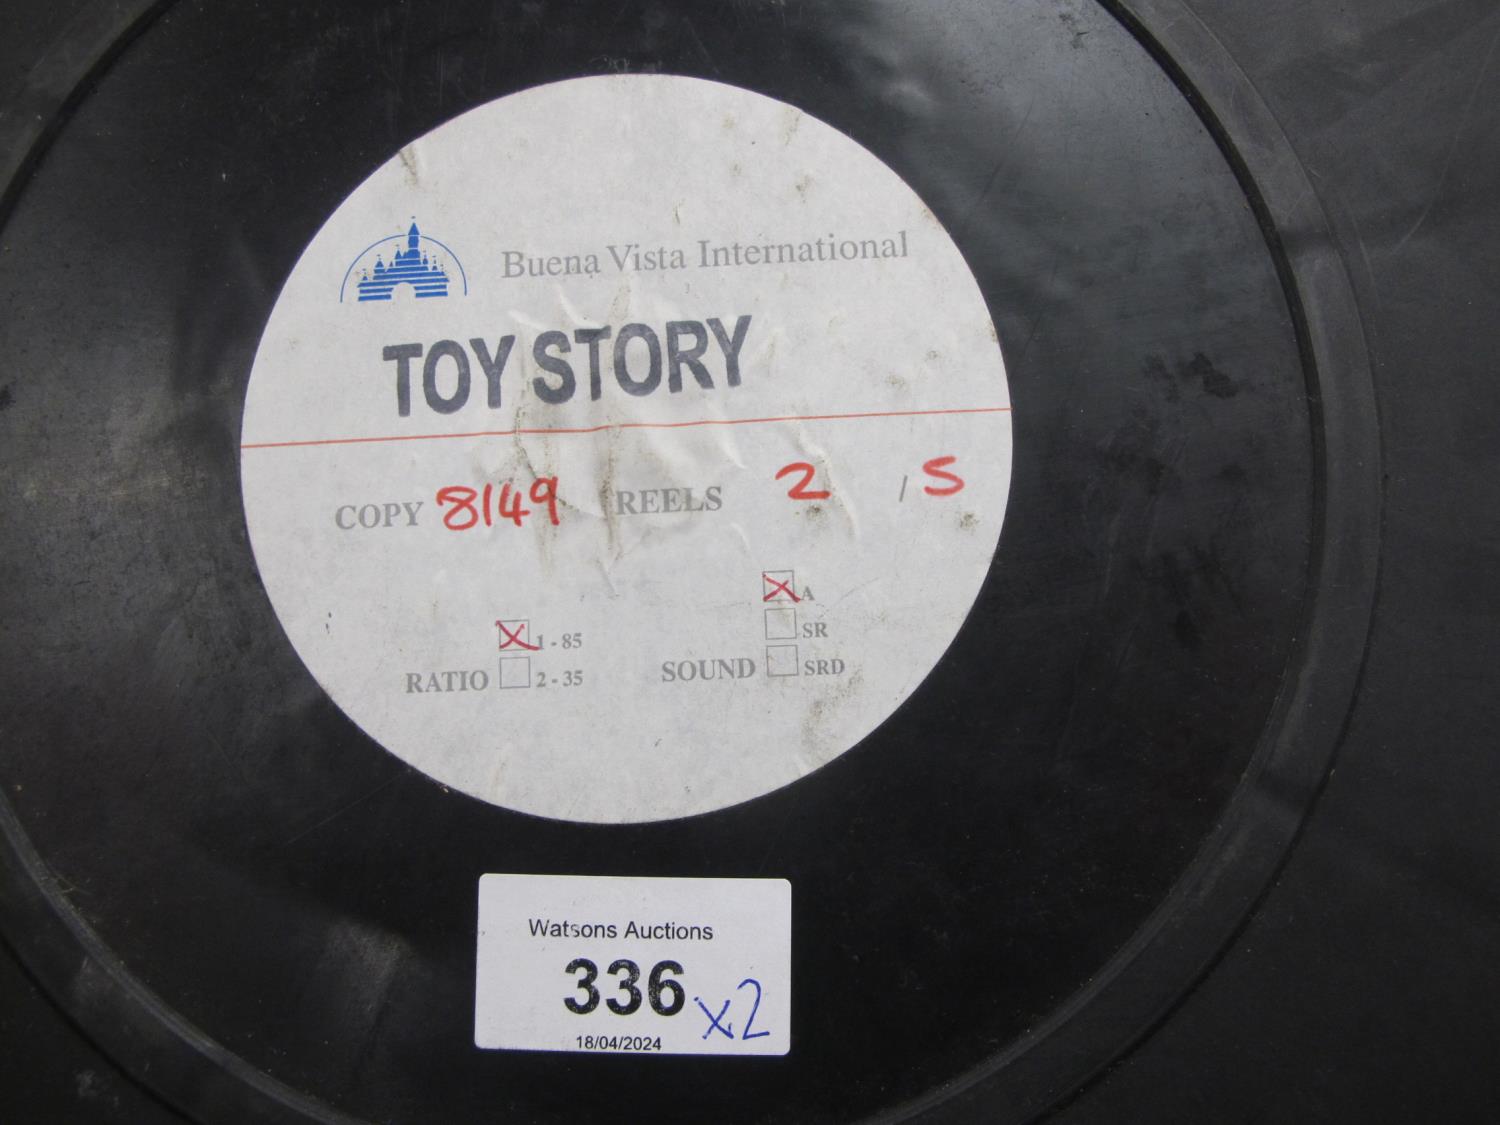 Cased 35mm film reels 1 & 2 (of 5)Copy 8149 for Buena Vista International Toy Story - 14.75" dia - Image 3 of 3